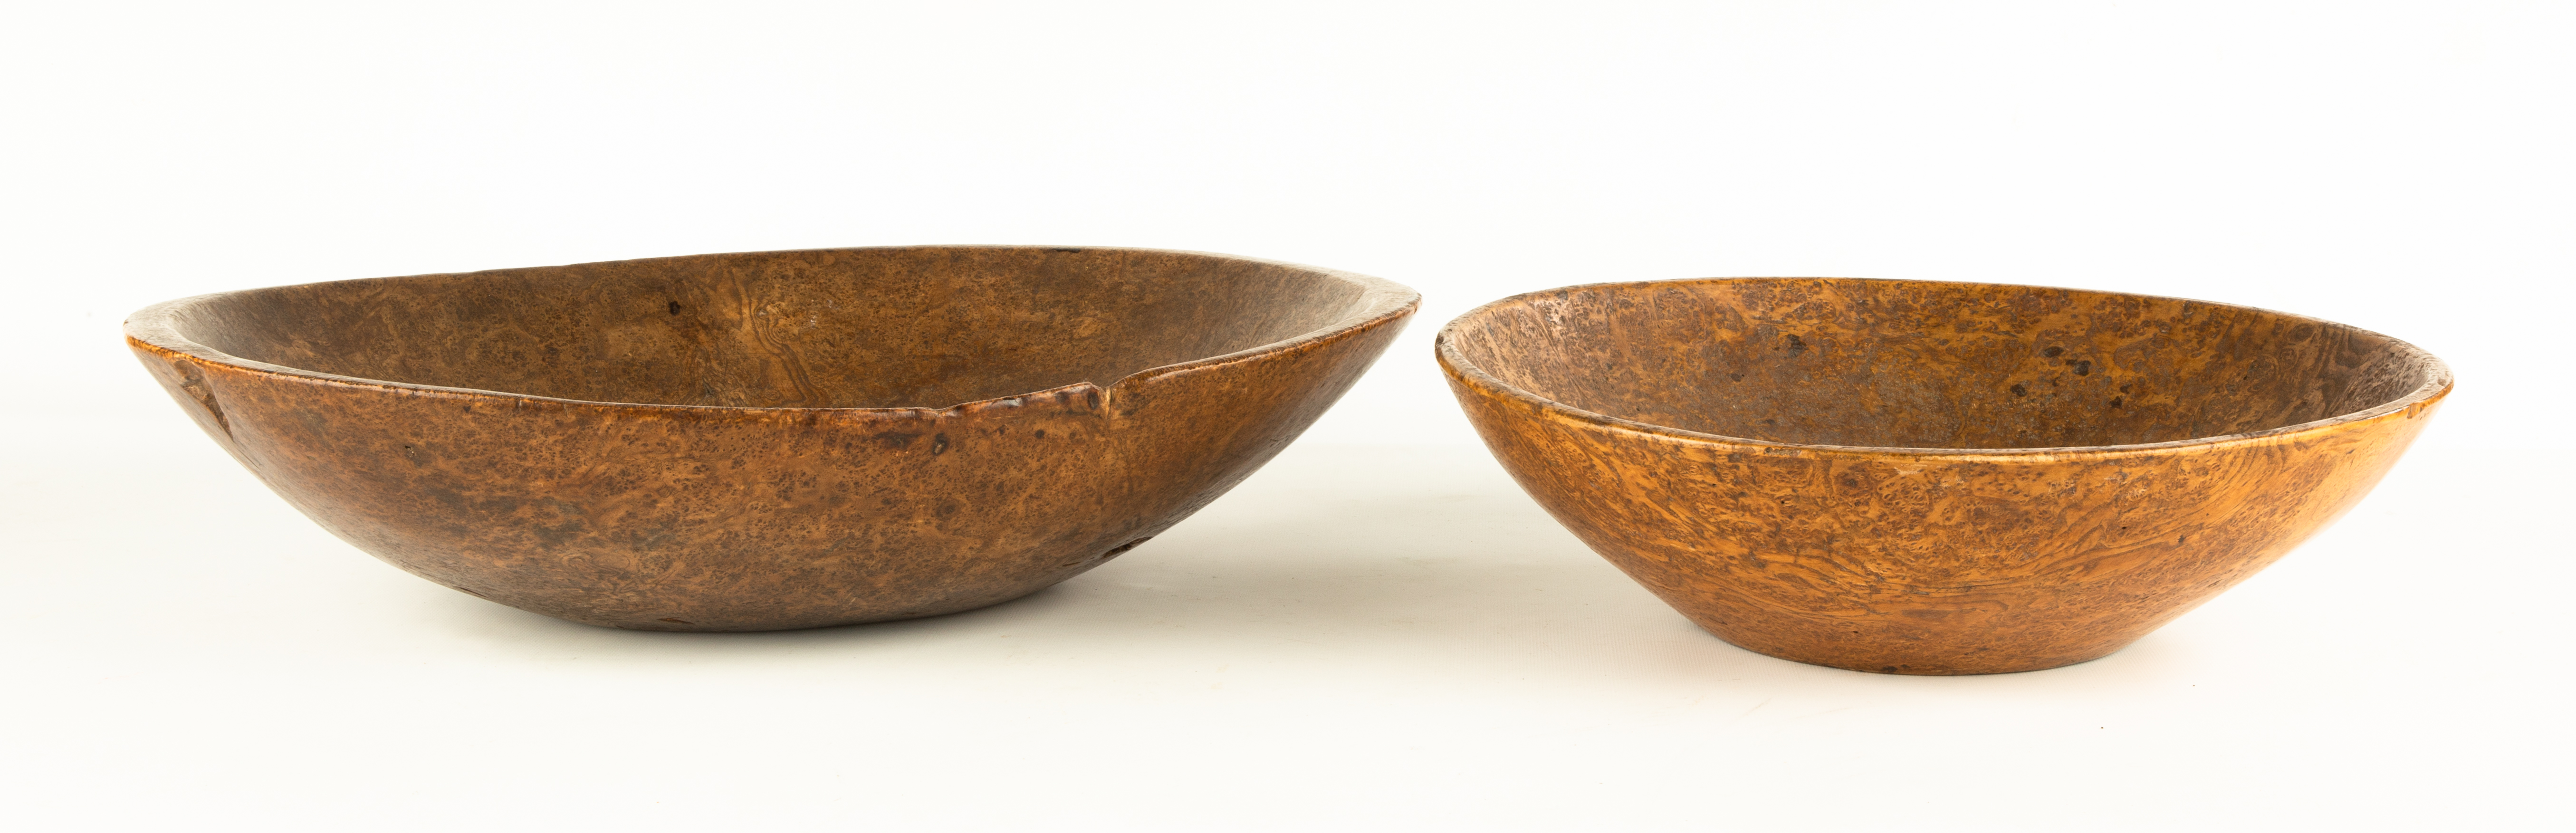 TWO EARLY AMERICAN BURL BOWLS Early